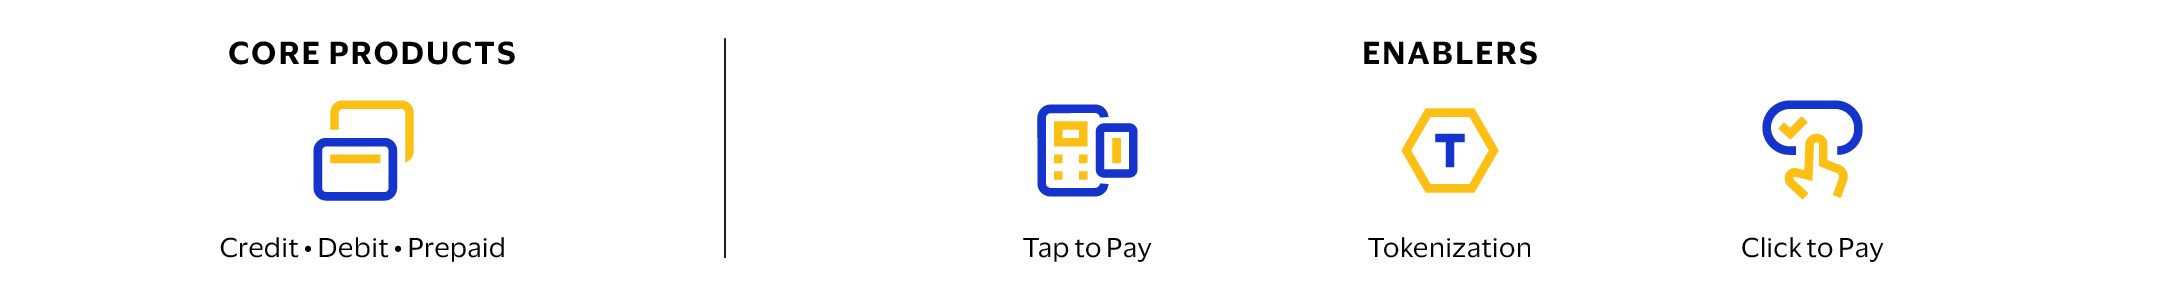 Visa-AR22_Business-section-stats_Consumer-Payments-icons.jpg